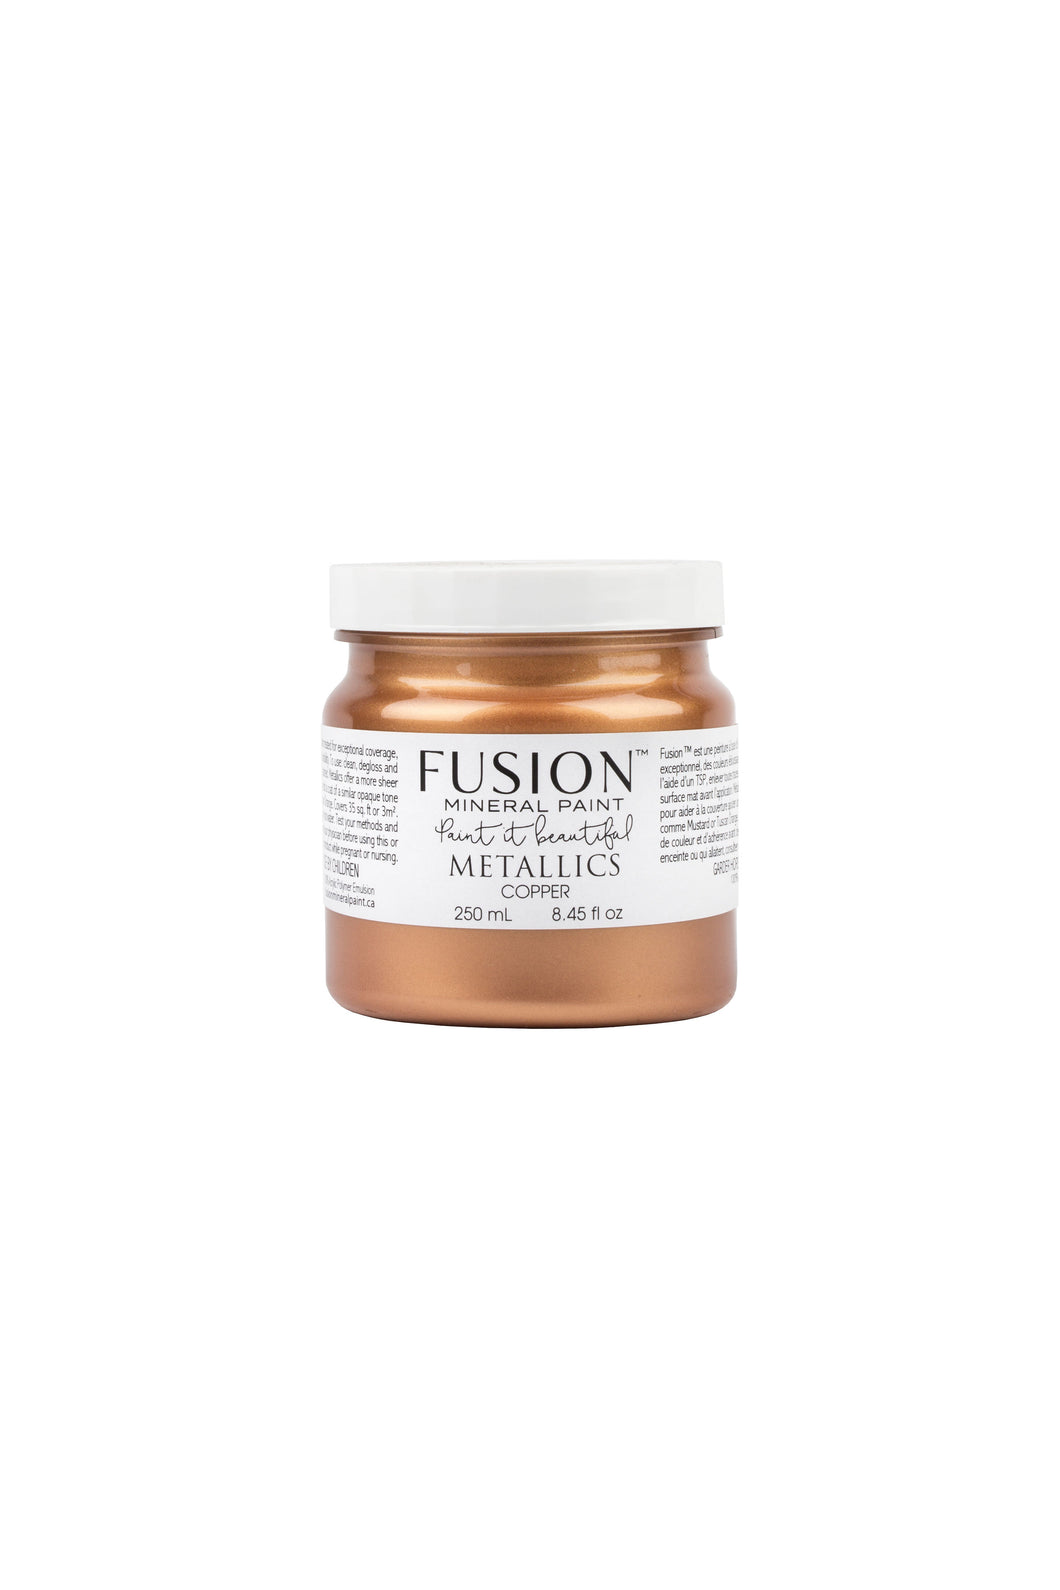 Fusion Mineral Paint - Metallics (Full Size)